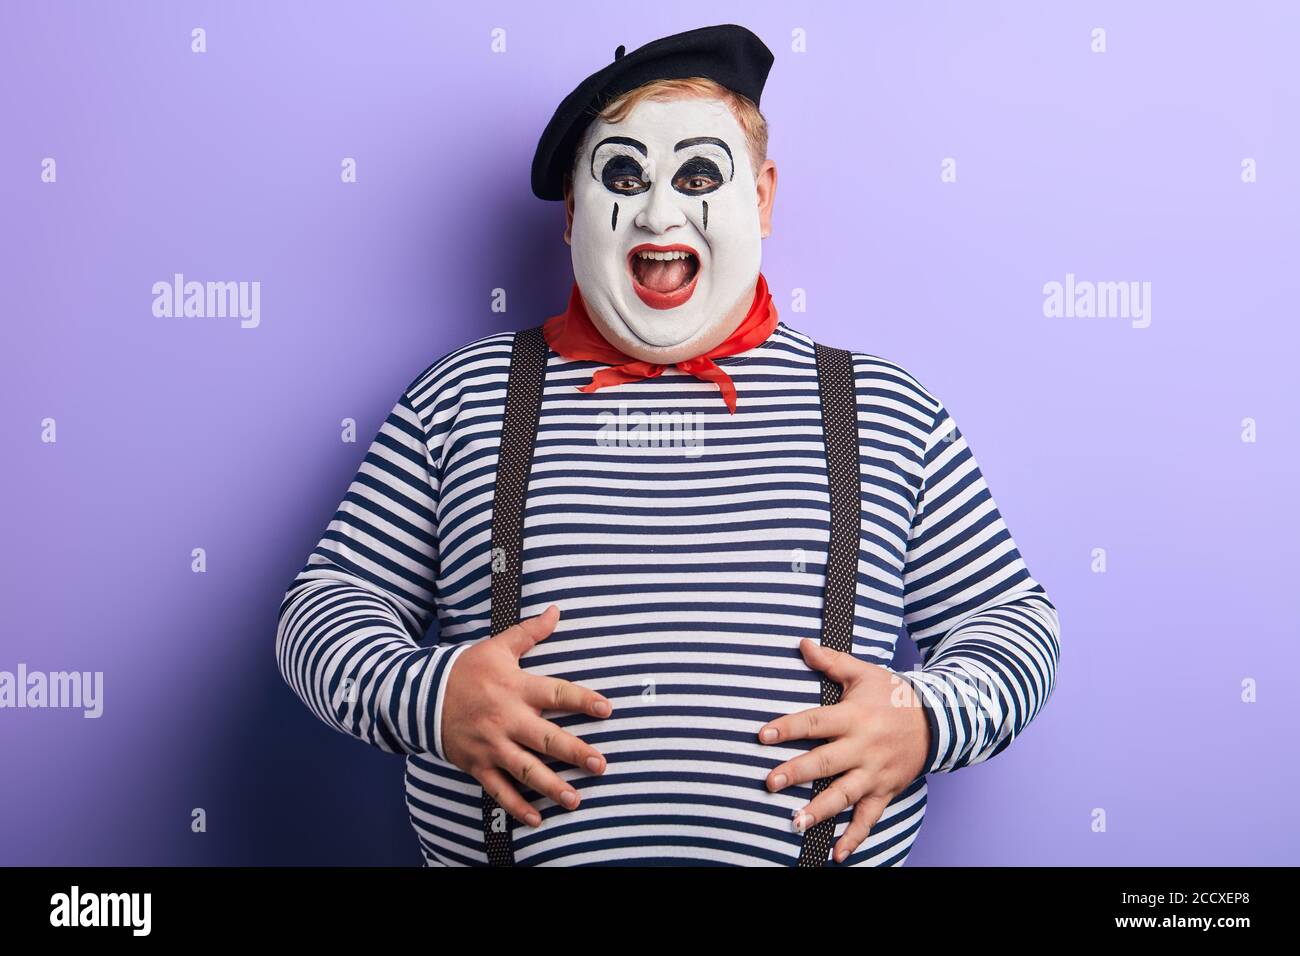 young woman with body painting on her face, ugly scary clown, Halloween  topic Stock Photo - Alamy